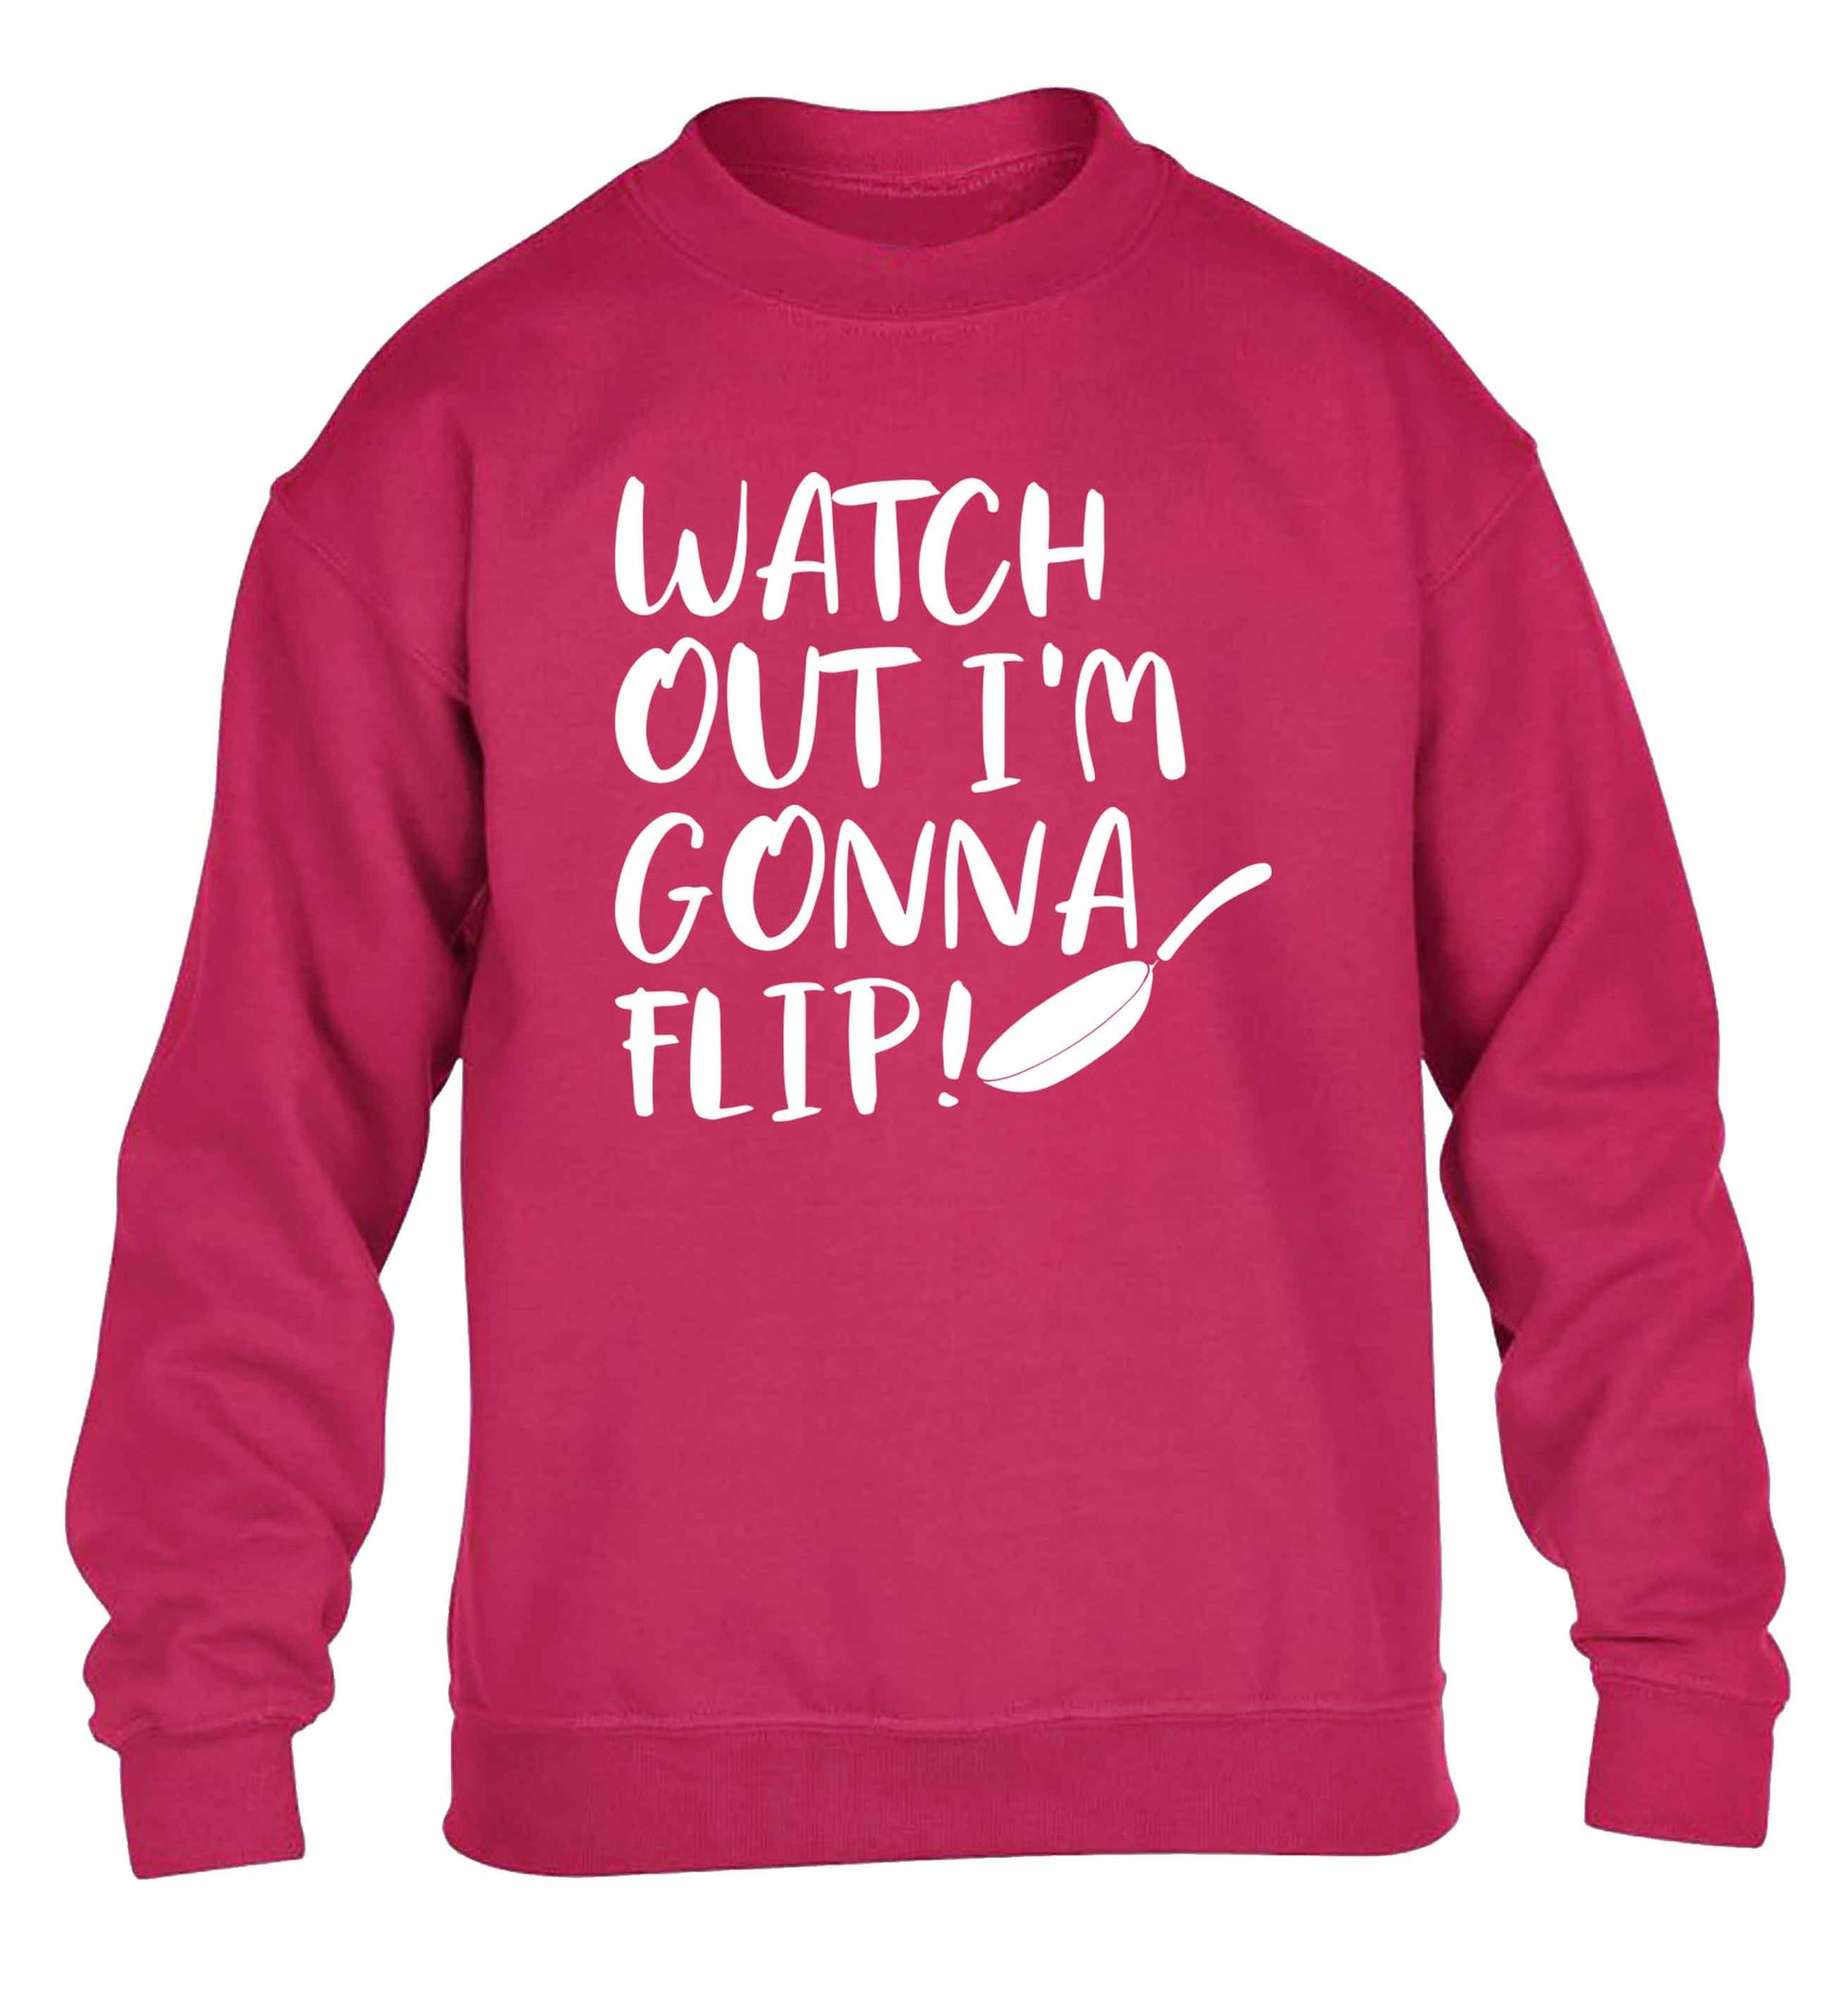 Watch out I'm gonna flip! children's pink sweater 12-13 Years